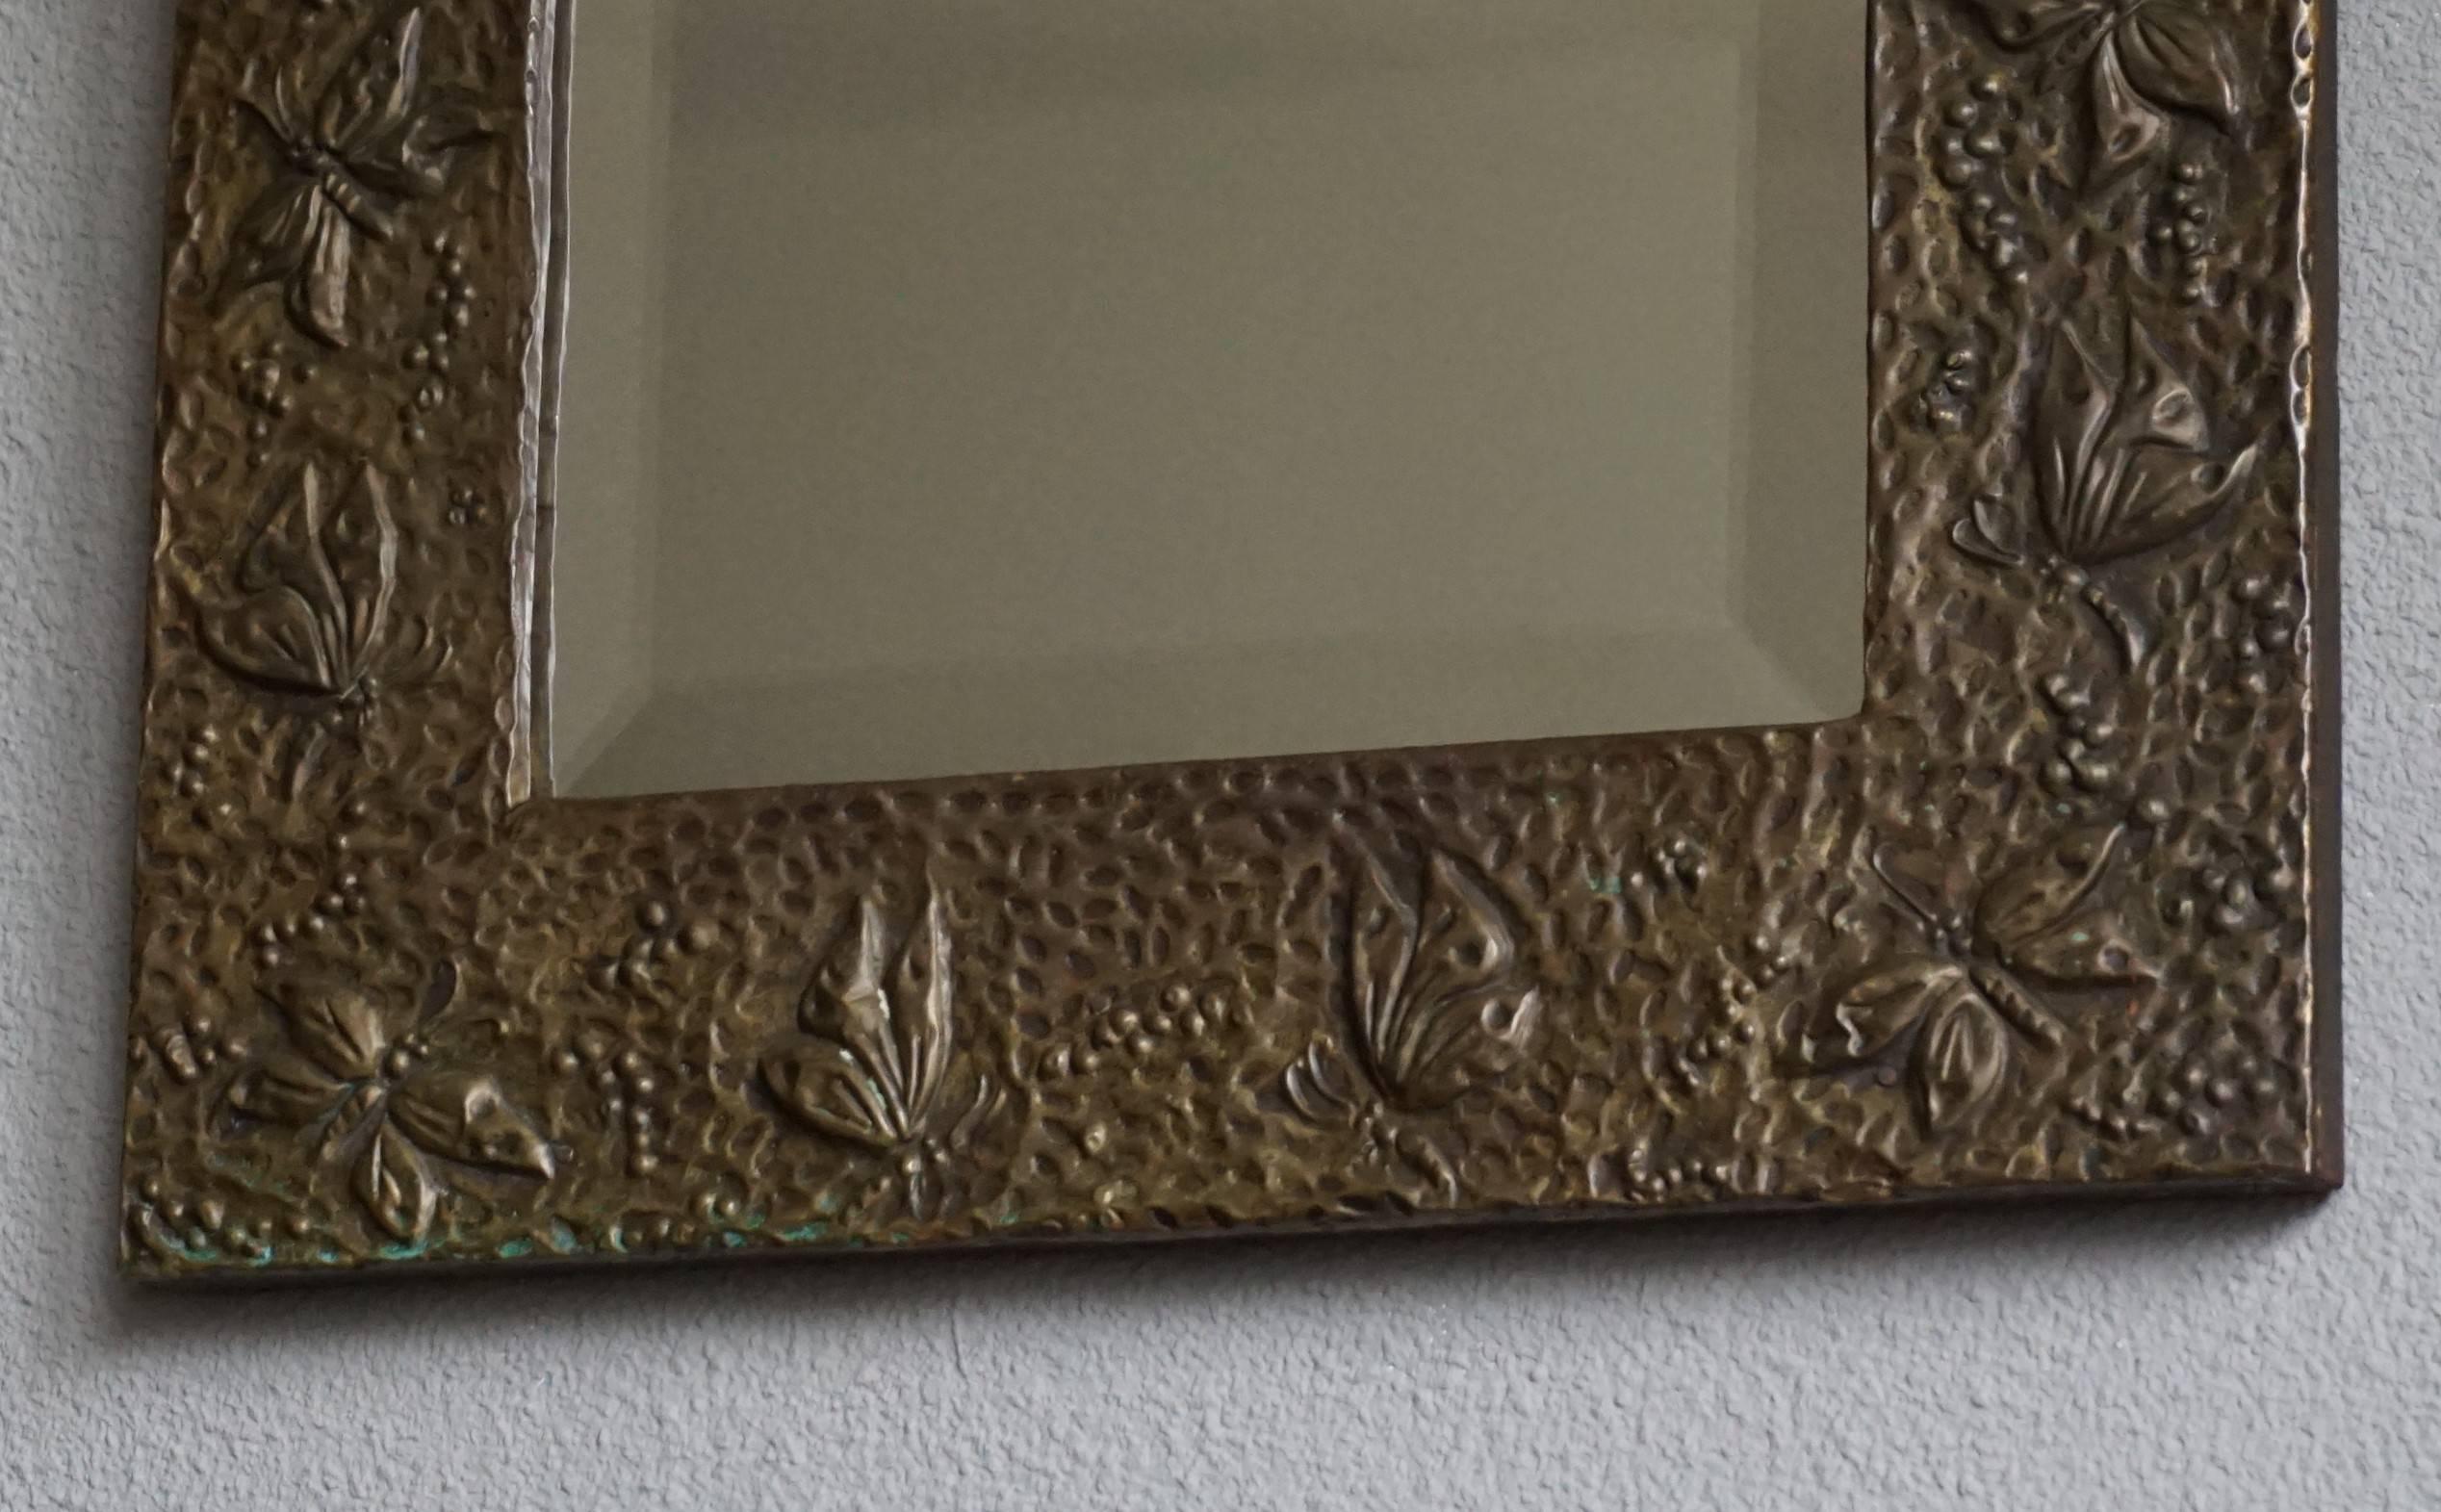 One of a kind Arts and Crafts mirror frame with the original and mint beveled mirror.

This unique Arts and Crafts mirror has been looked after very well. Previous owners fortunately have appreciated and respected this wonderfully made Arts and